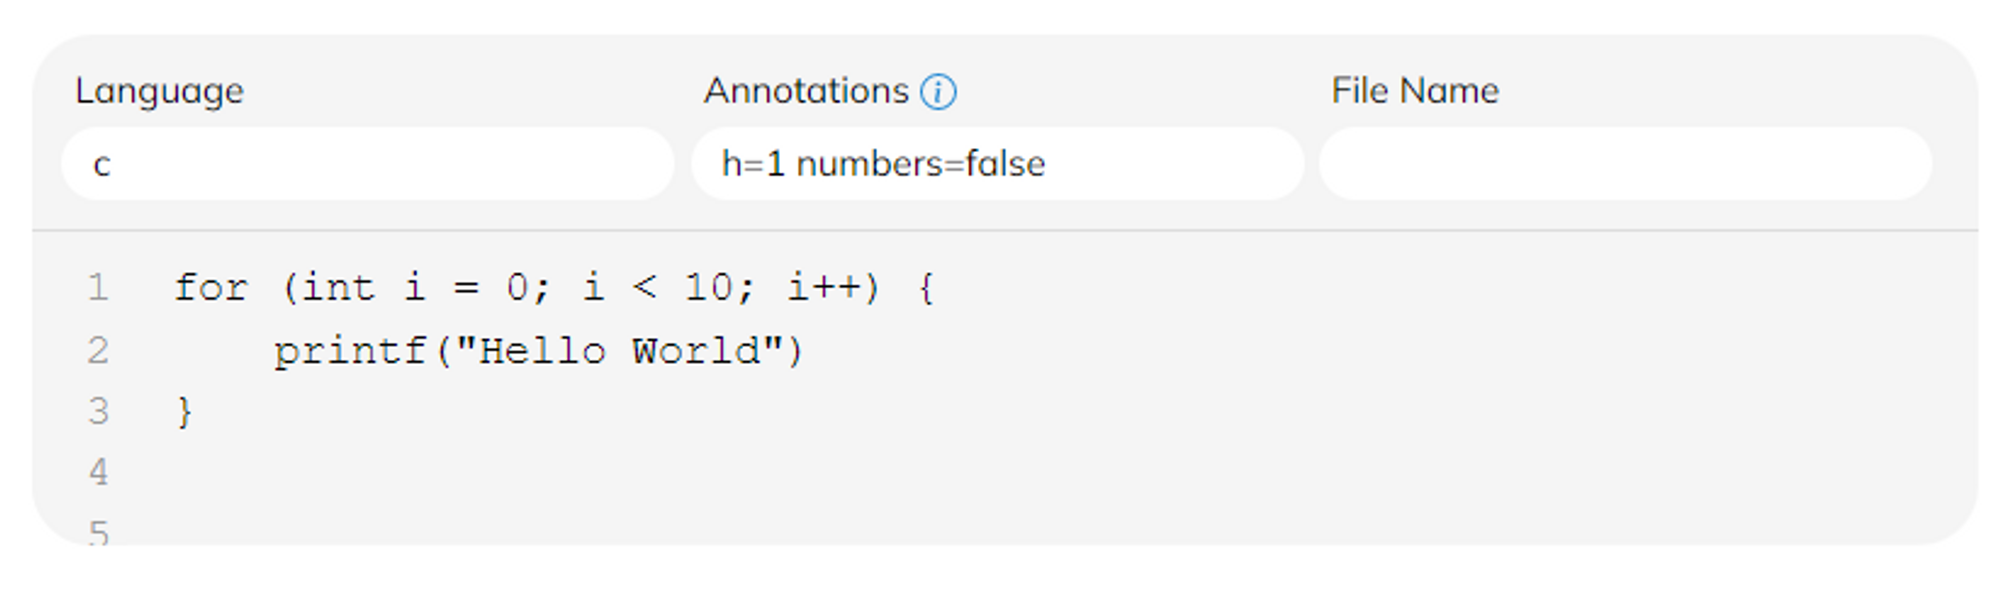 How to add Syntax Highlighting to your blog - use annotations for highlighting and numbering